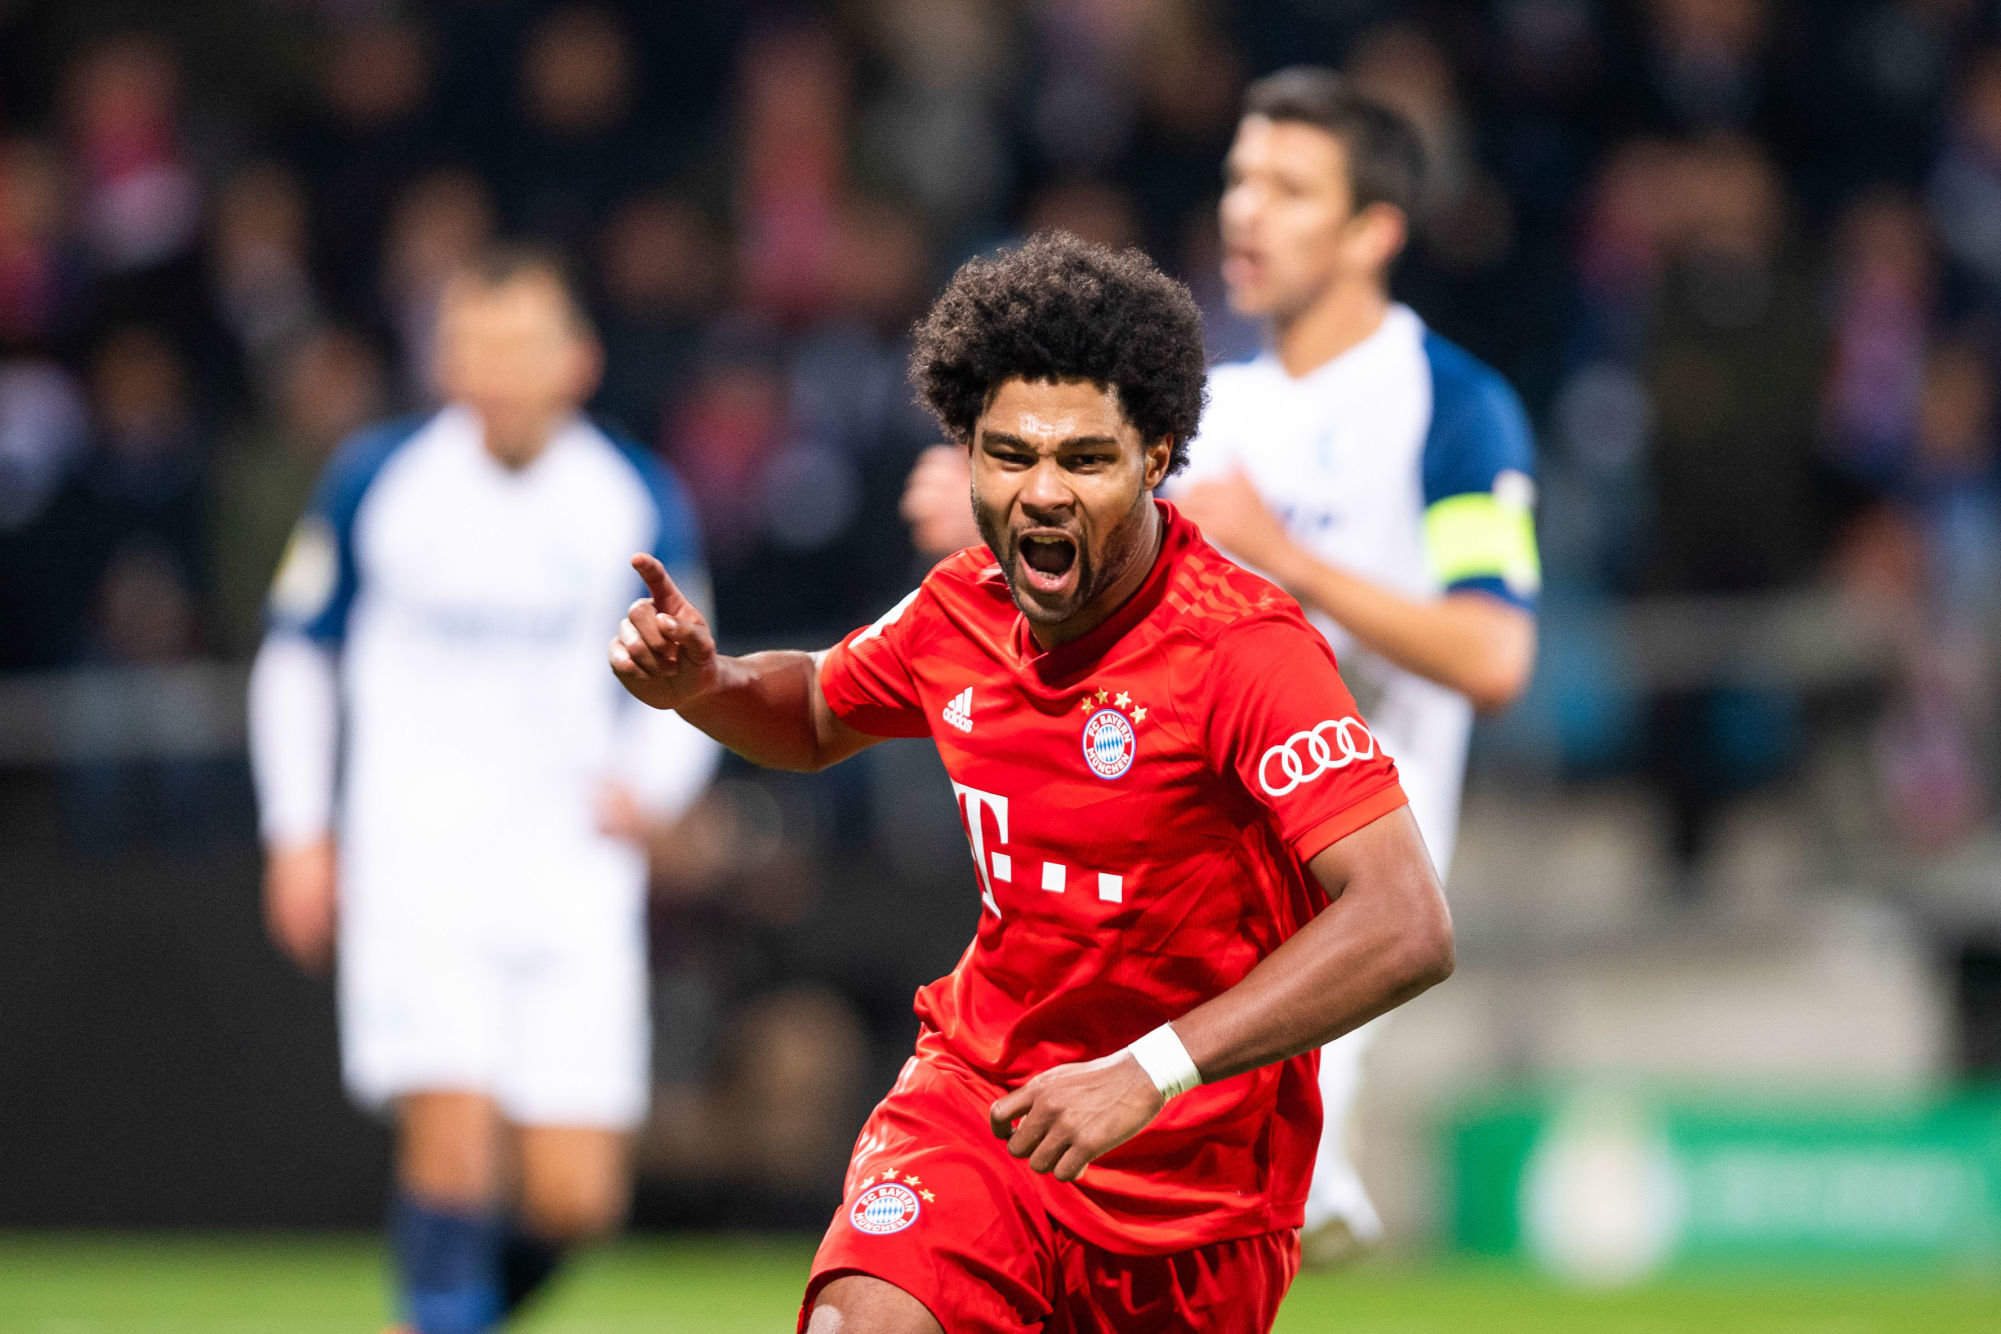 29 October 2019, North Rhine-Westphalia, Bochum: Soccer: DFB Cup, VfL Bochum - Bayern Munich, 2nd round in the Vonovia Ruhr Stadium. Munich's Serge Gnabry rejoices after his goal to 1:1. Photo: David Inderlied/dpa - IMPORTANT NOTE: In accordance with the requirements of the DFL Deutsche Fu?ball Liga or the DFB Deutscher Fu?ball-Bund, it is prohibited to use or have used photographs taken in the stadium and/or the match in the form of sequence images and/or video-like photo sequences. 

Photo by Icon Sport - Serge GNABRY - Vonovia Ruhrstadion - Bochum (Allemagne)